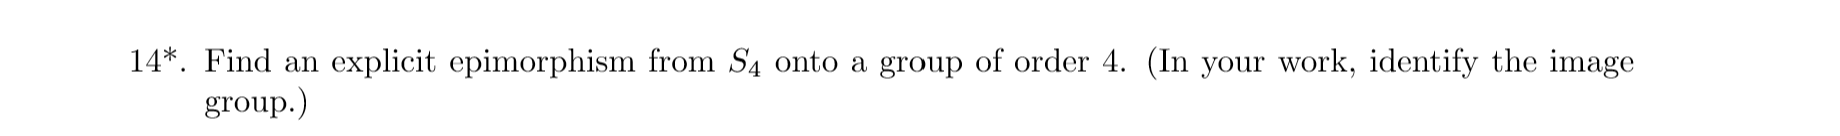 14*. Find an explicit epimorphism from S4 onto a group of order 4. (In your work, identify the image
group.)
